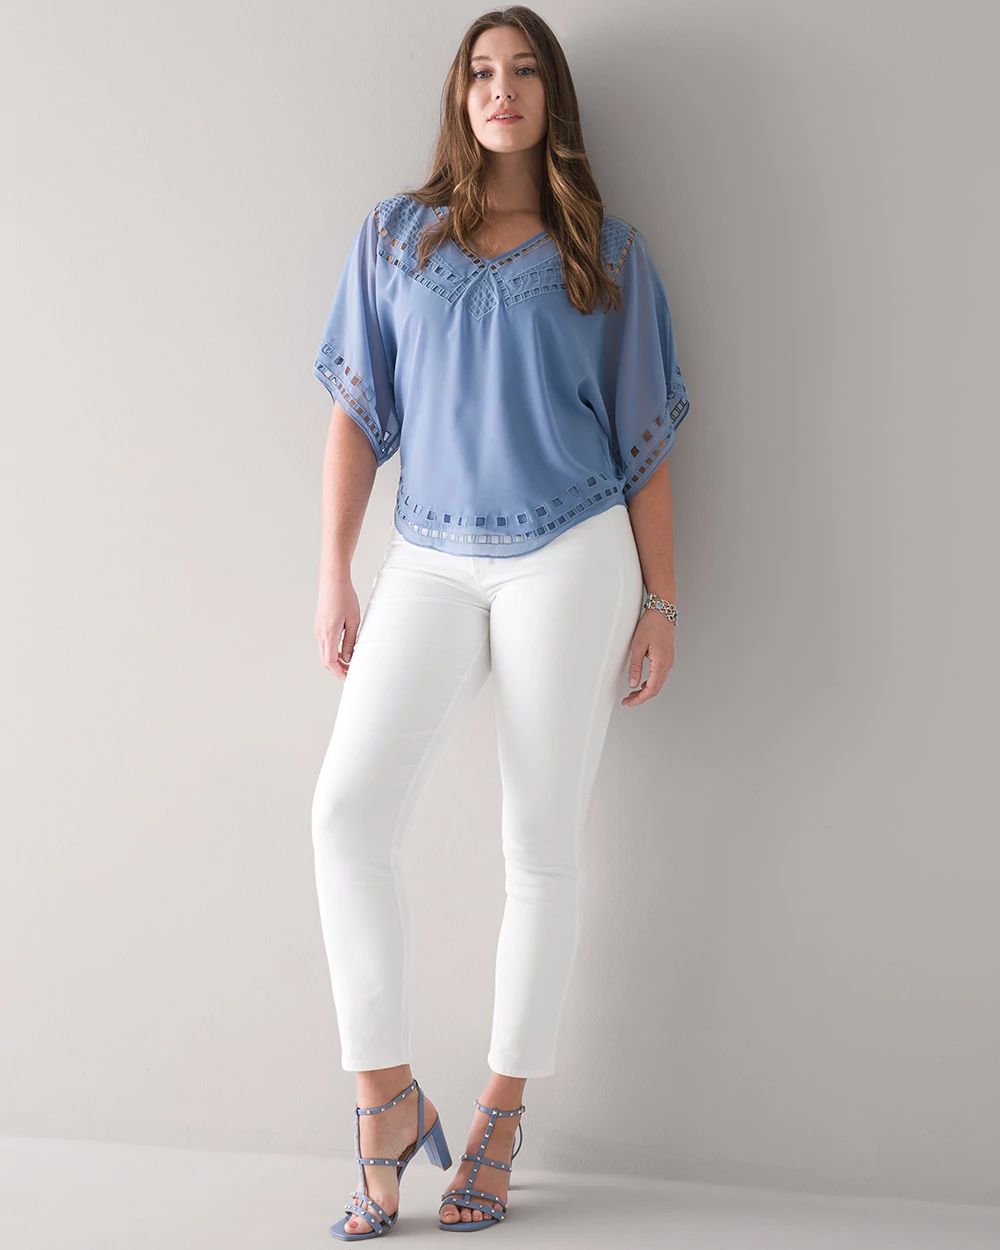 Curvy High-Rise Straight White Jeans click to view larger image.